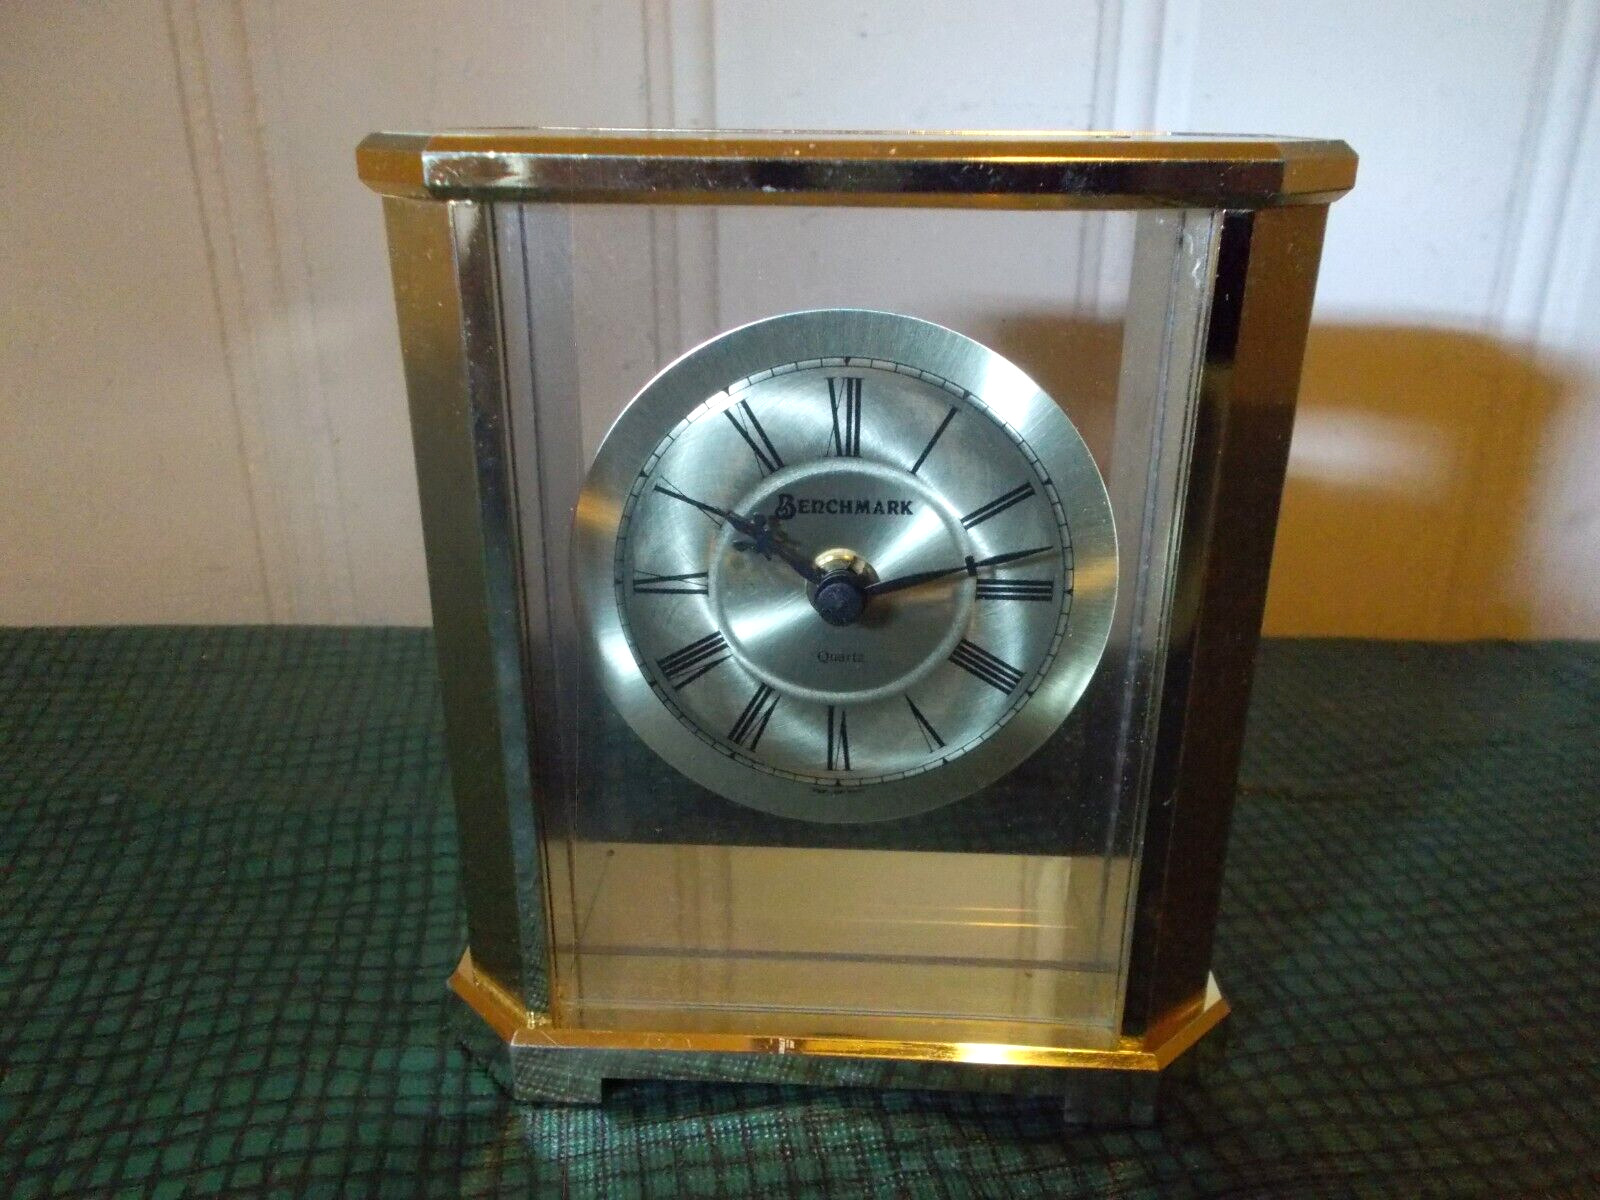 BENCHMARK SHELF CLOCK VINTAGE BRASS AND GLASS WEST GERMANY ACCURATE TIME